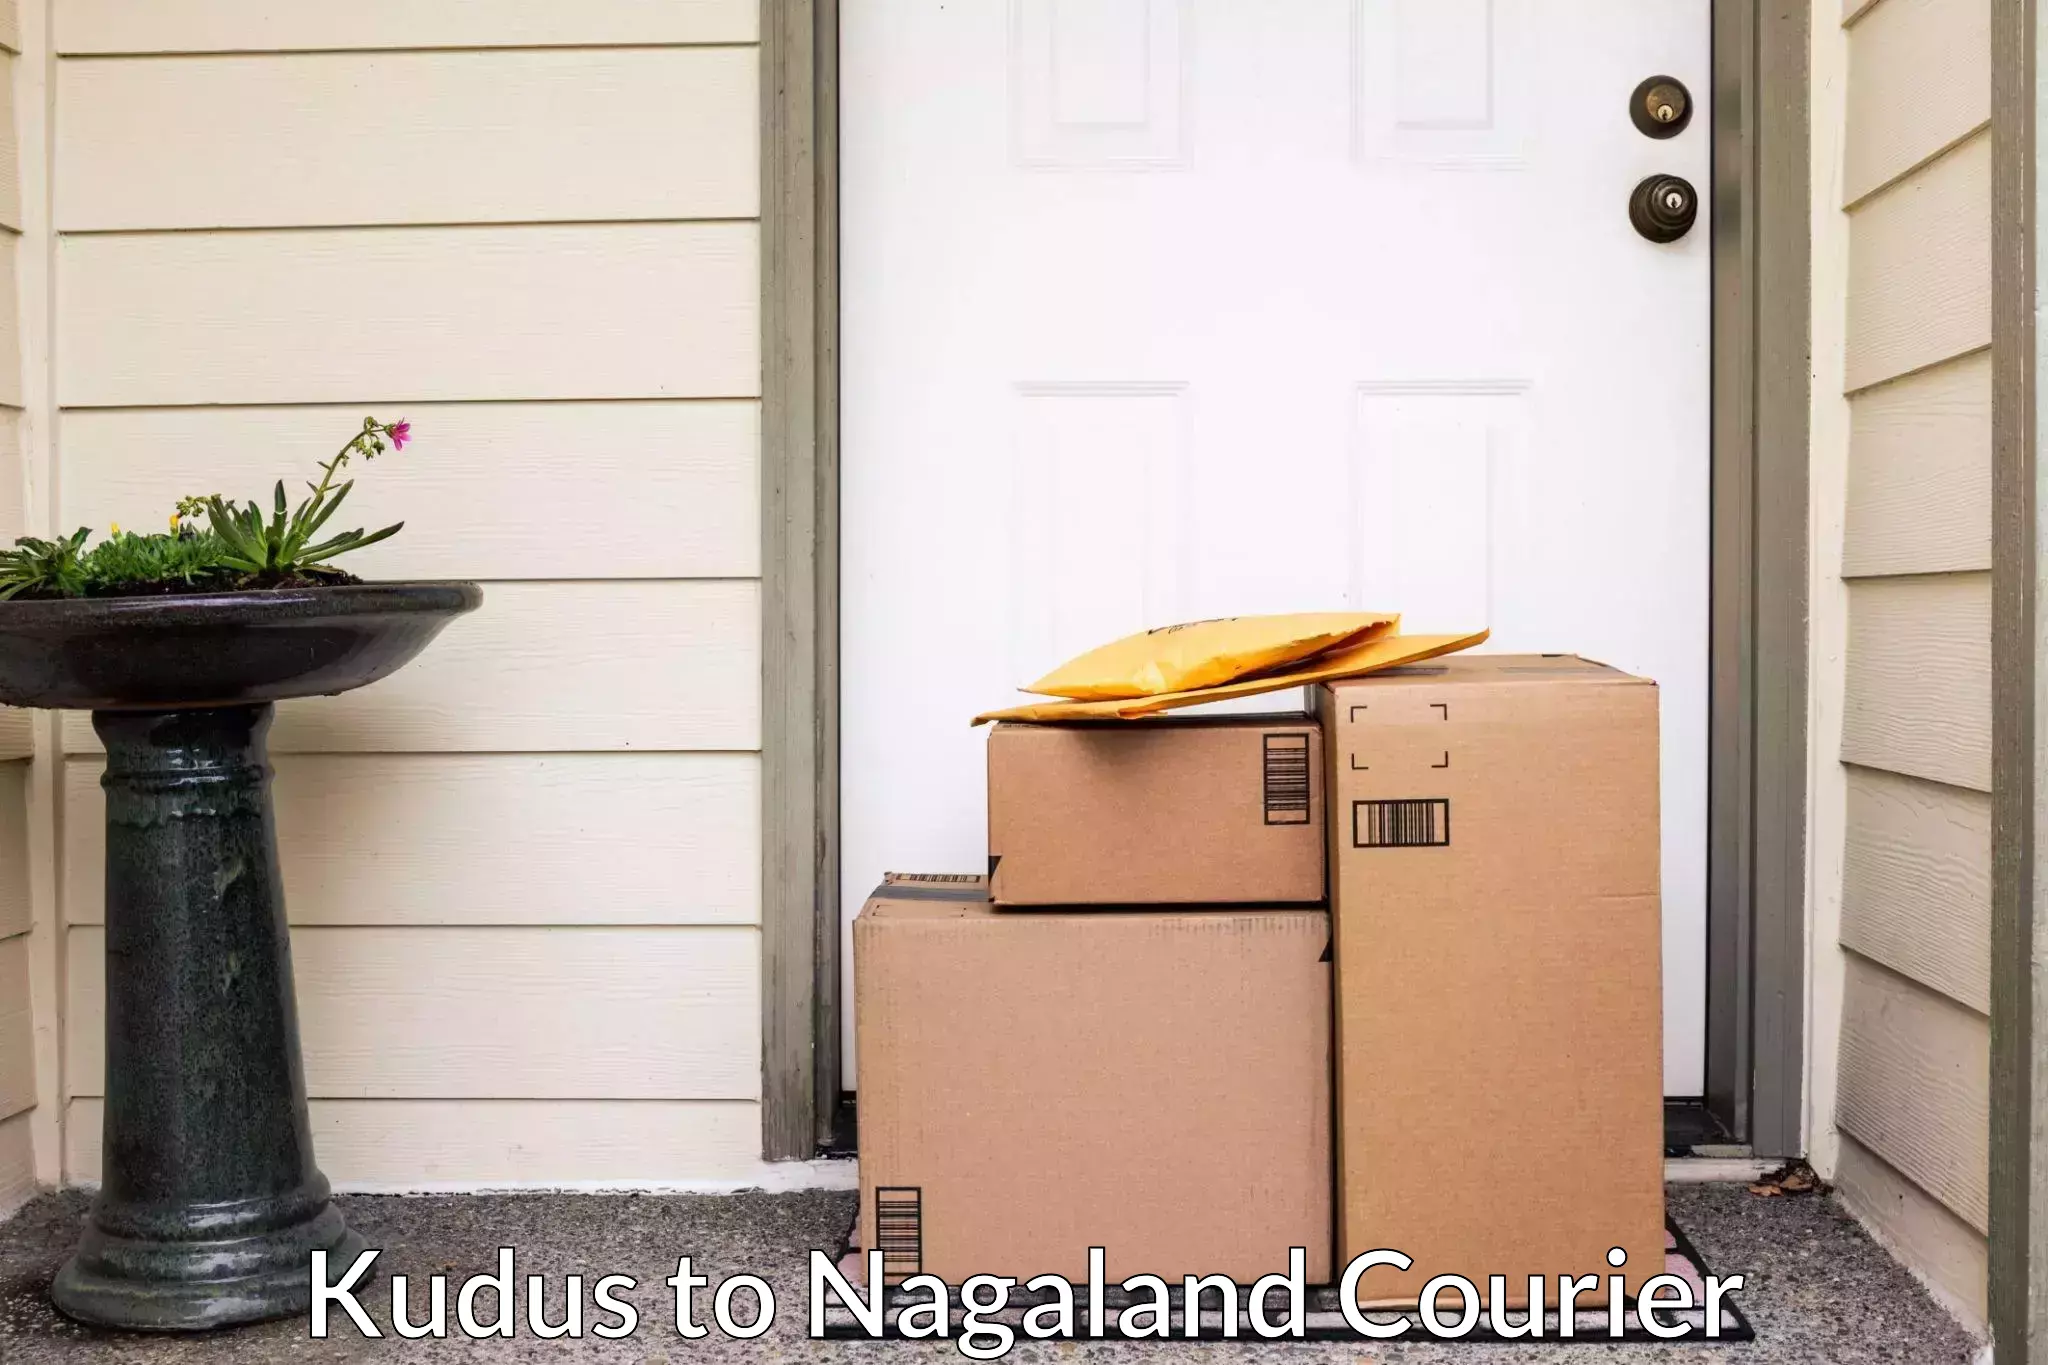 Residential moving experts Kudus to Nagaland